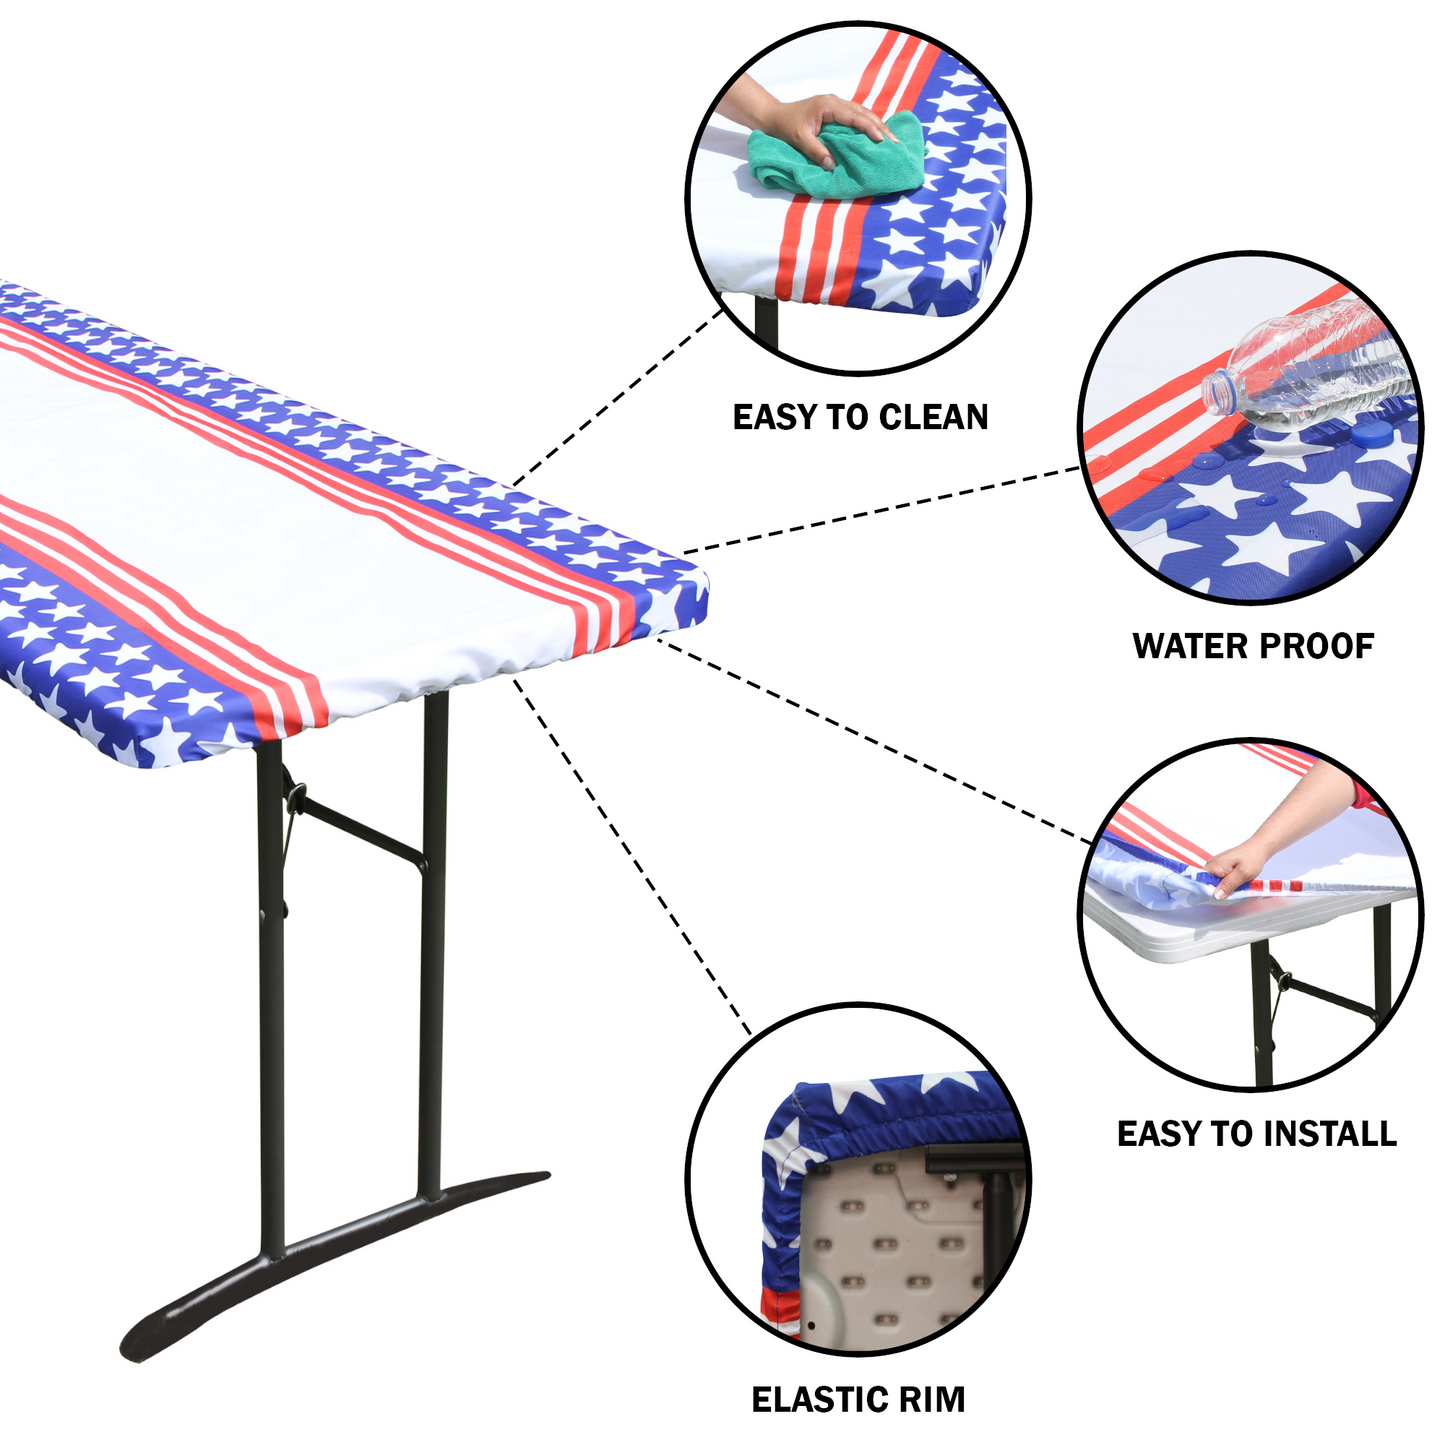 TableCloth PLUS 72" Stars & Stripes Fitted Polyester Tablecloth for 6' Folding Tables is easy to clean, water proof, easy to install, and has an elastic rim